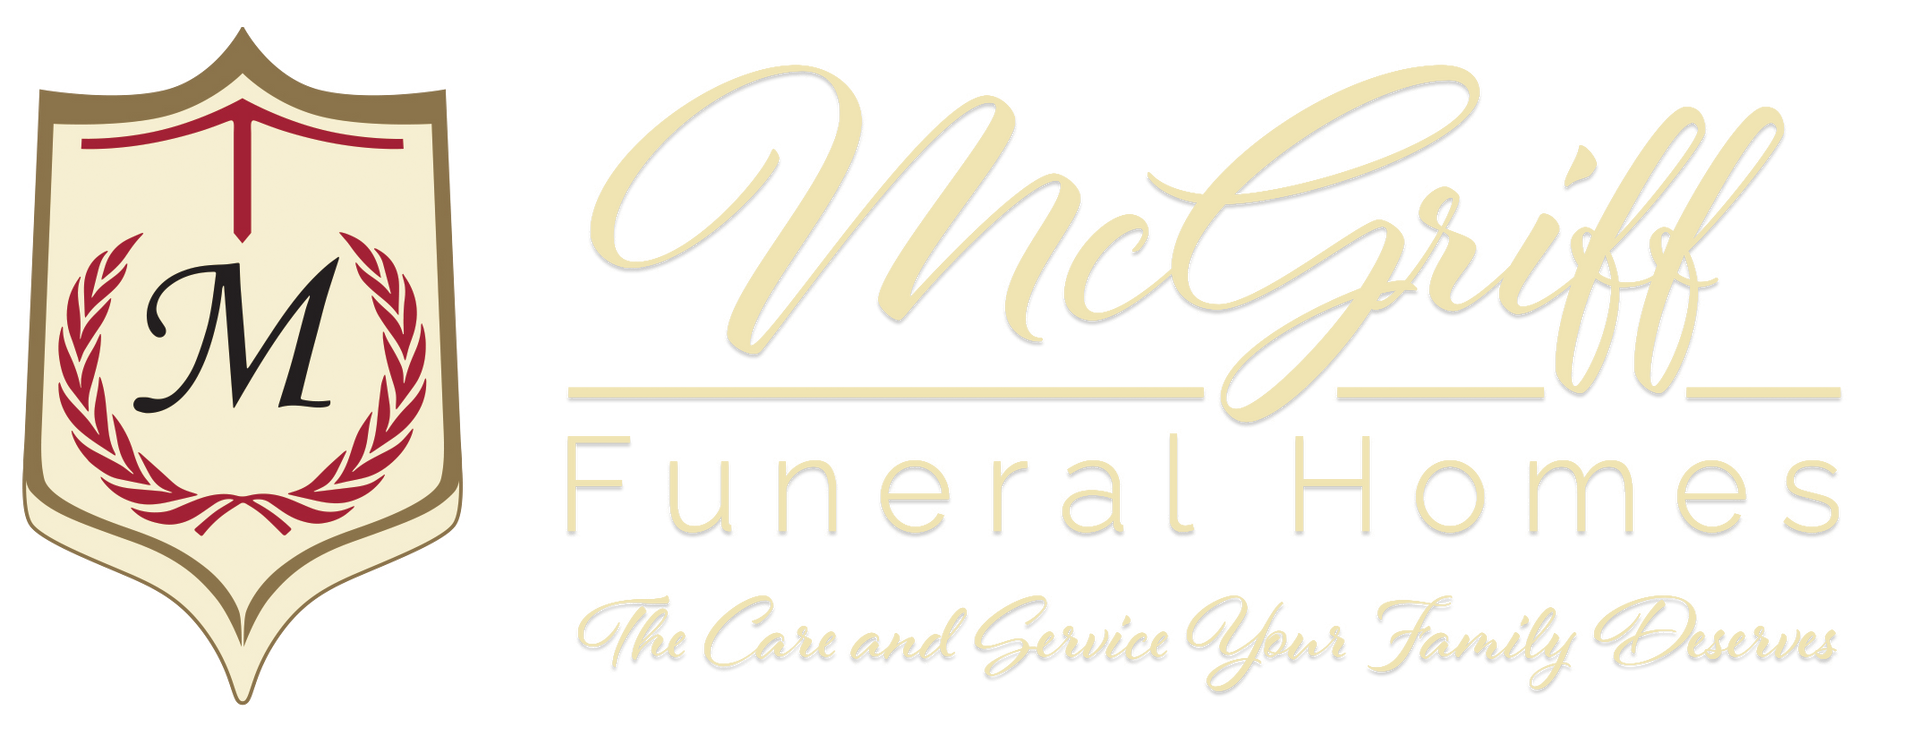 McGriff Funeral Homes Logo